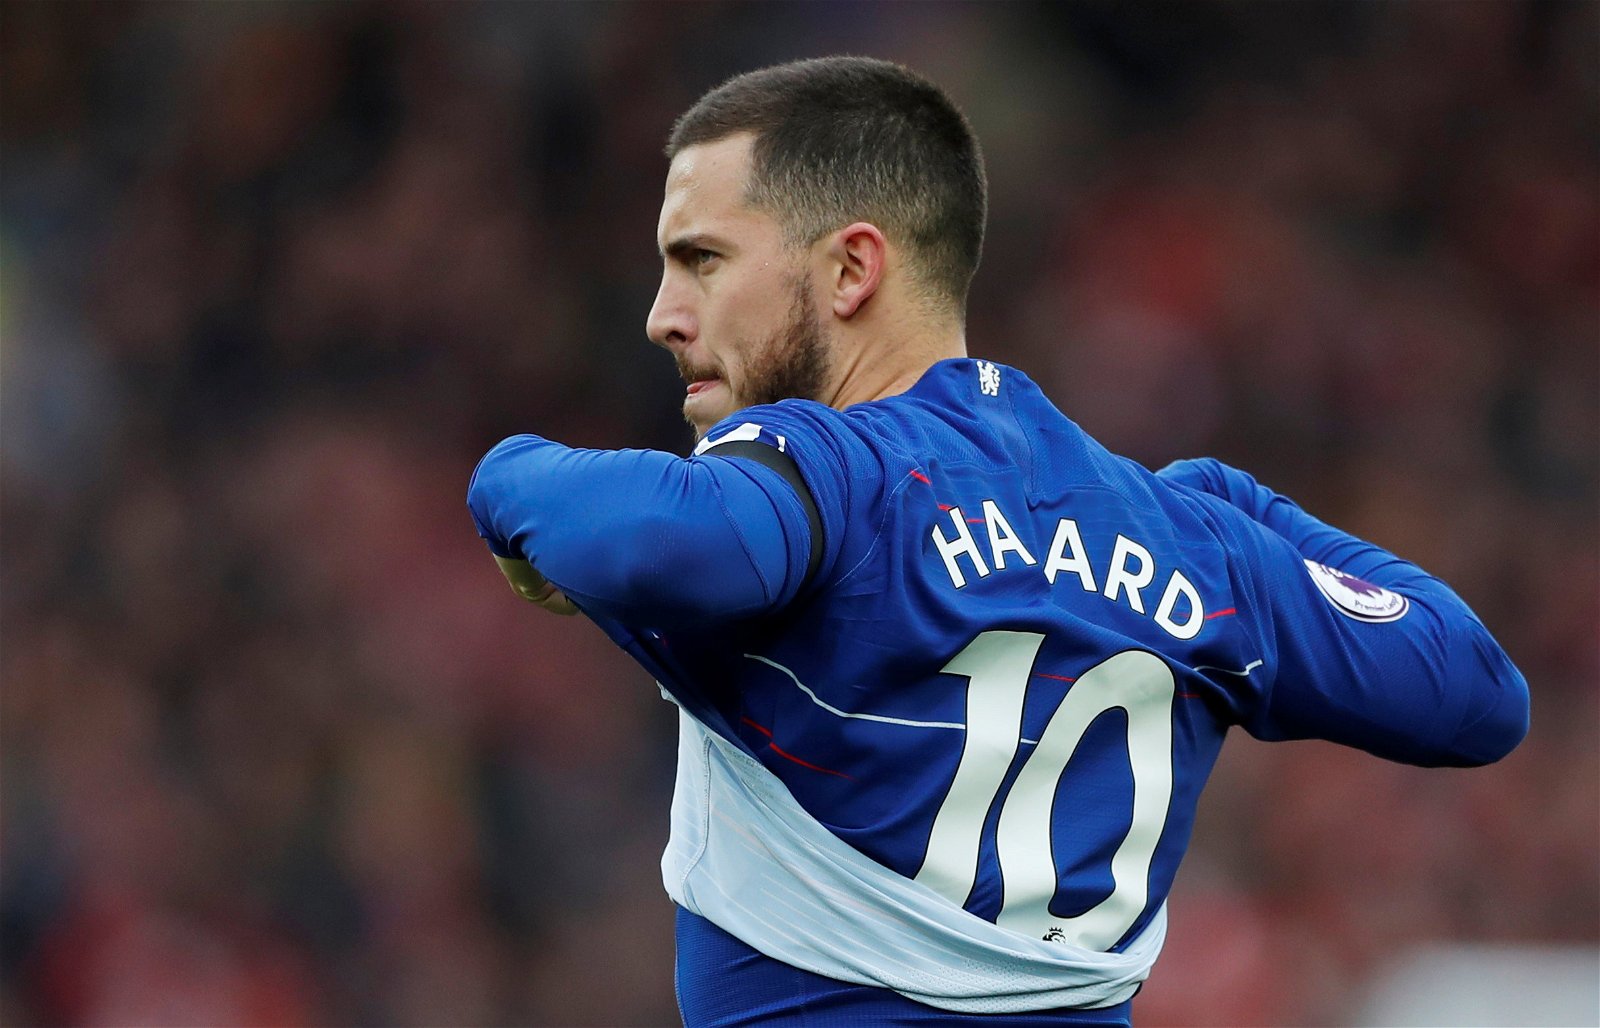 Former Chelsea star says Hazard transfer could be great business for Chelsea